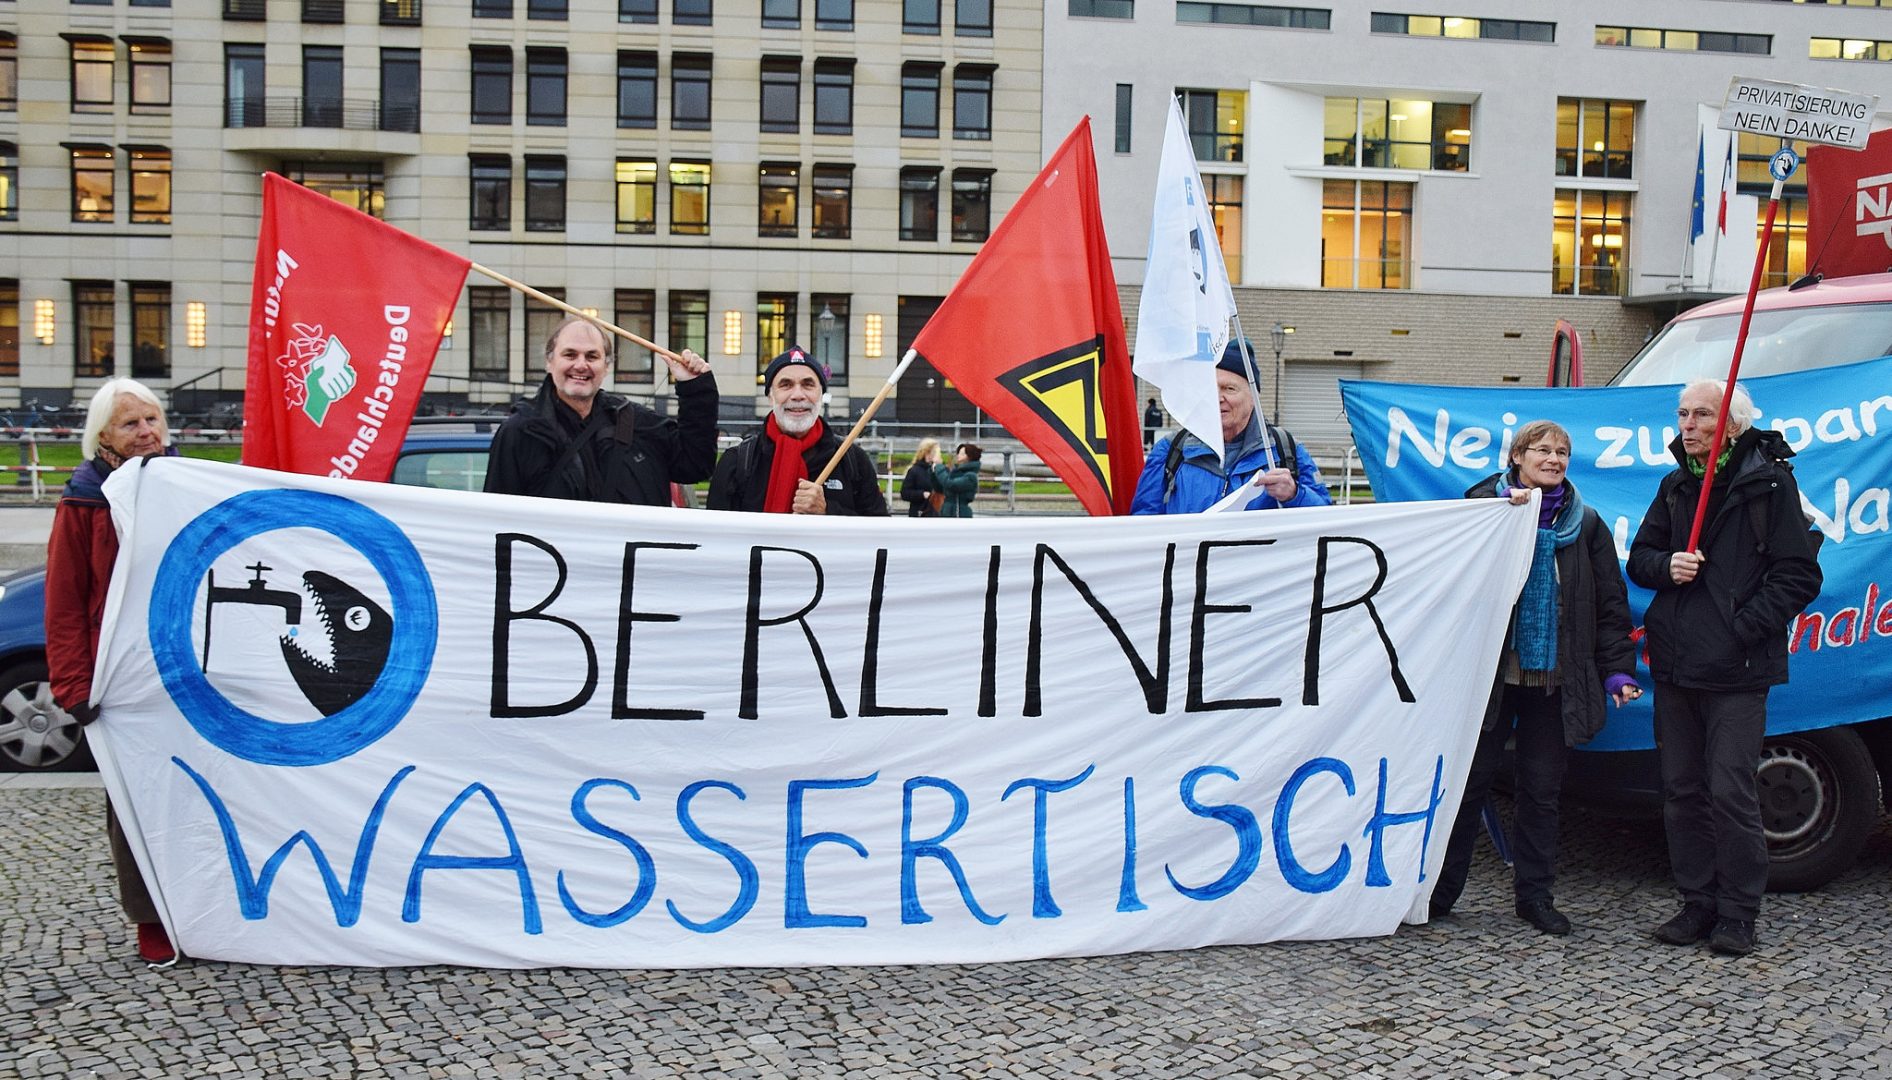 Berlin, Germany: Berliners defy government and win water remunicipalisation